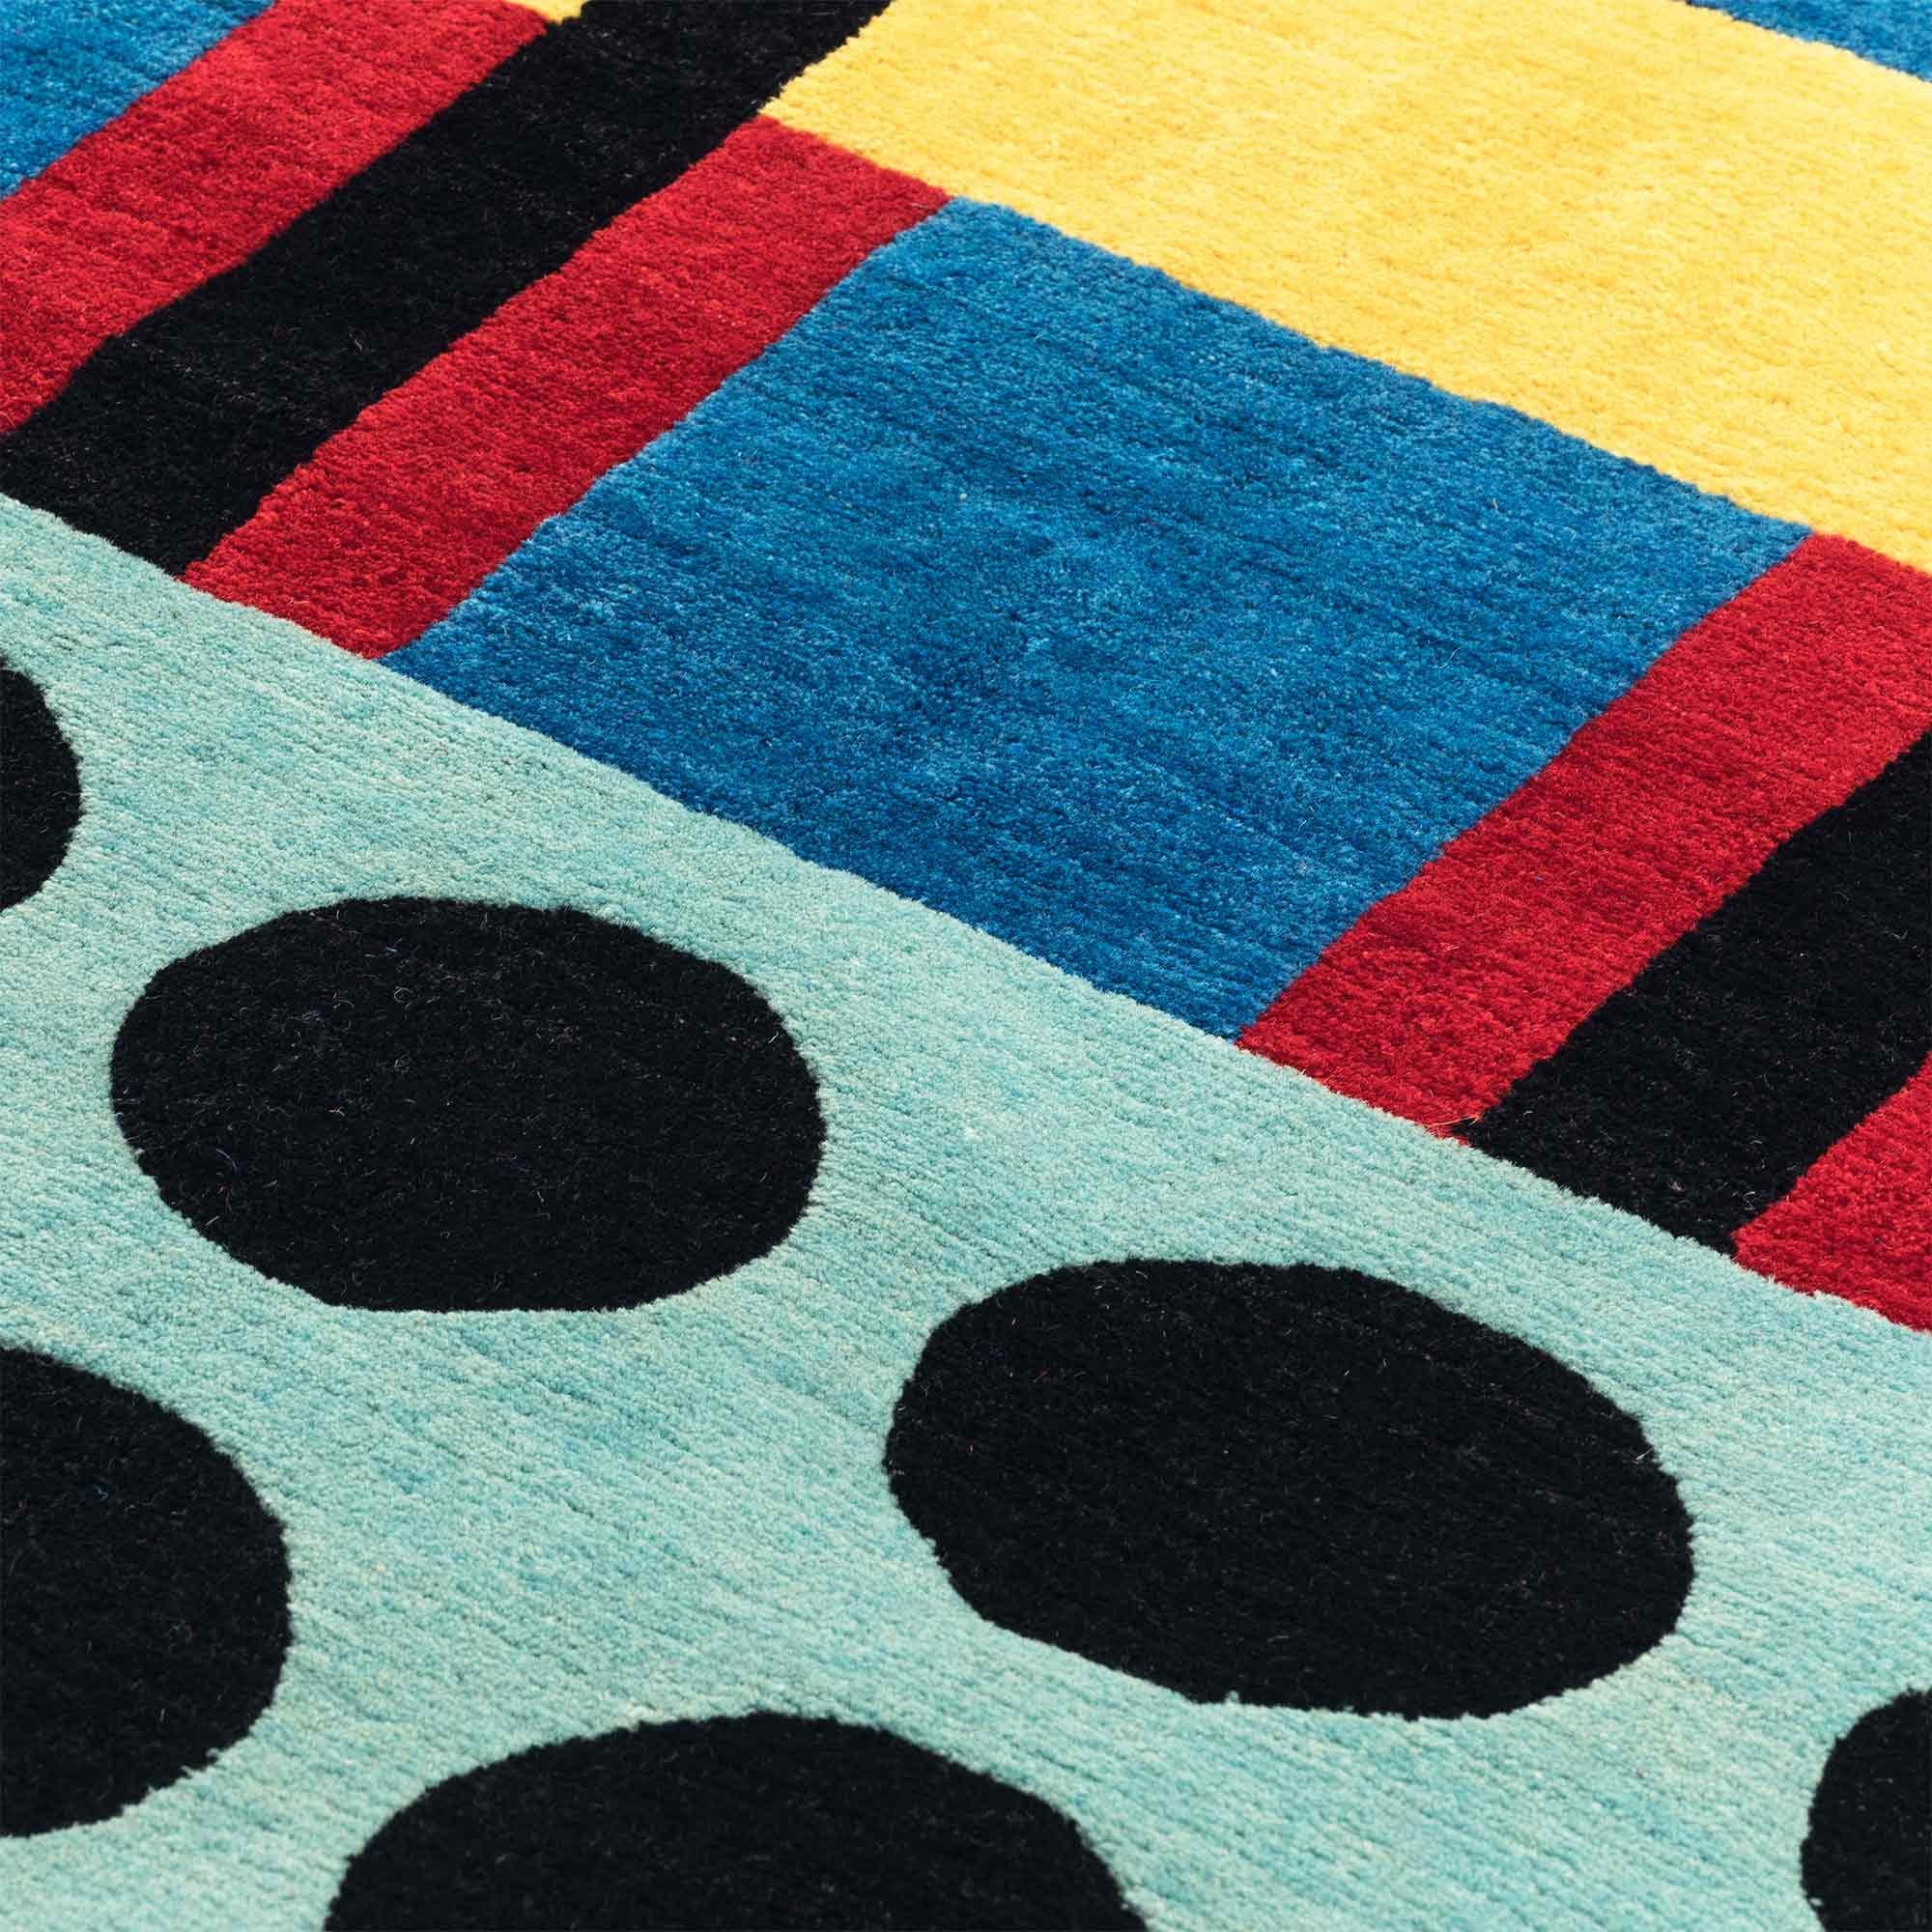 NDP55 woollen carpet by Nathalie Du Pasquier for Post Design collection/Memphis

A woollen carpet handcrafted by different Nepalese artisans. Made in a limited edition of 36 signed, numbered examples.

As the carpet is made by hand, there are